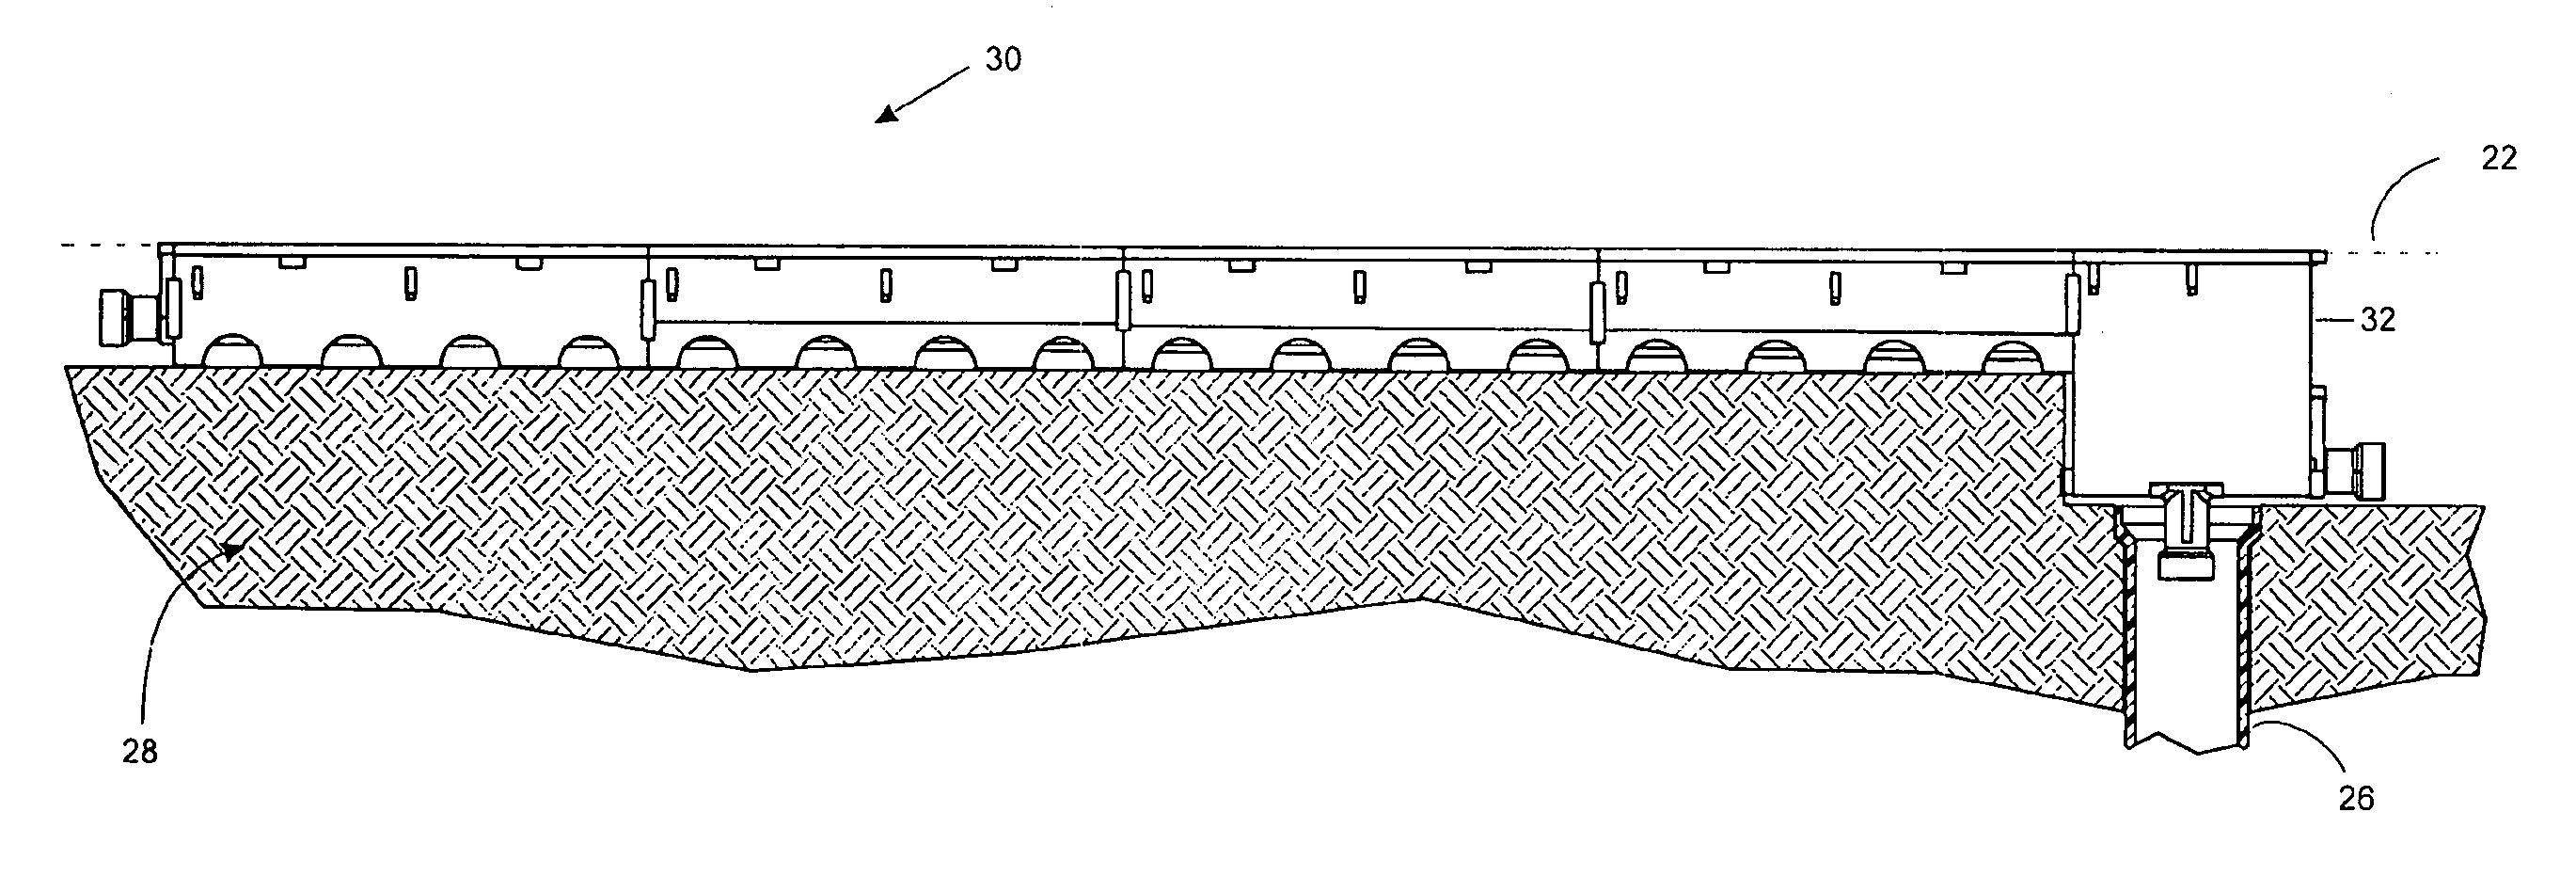 Pre-sloped trench drain system